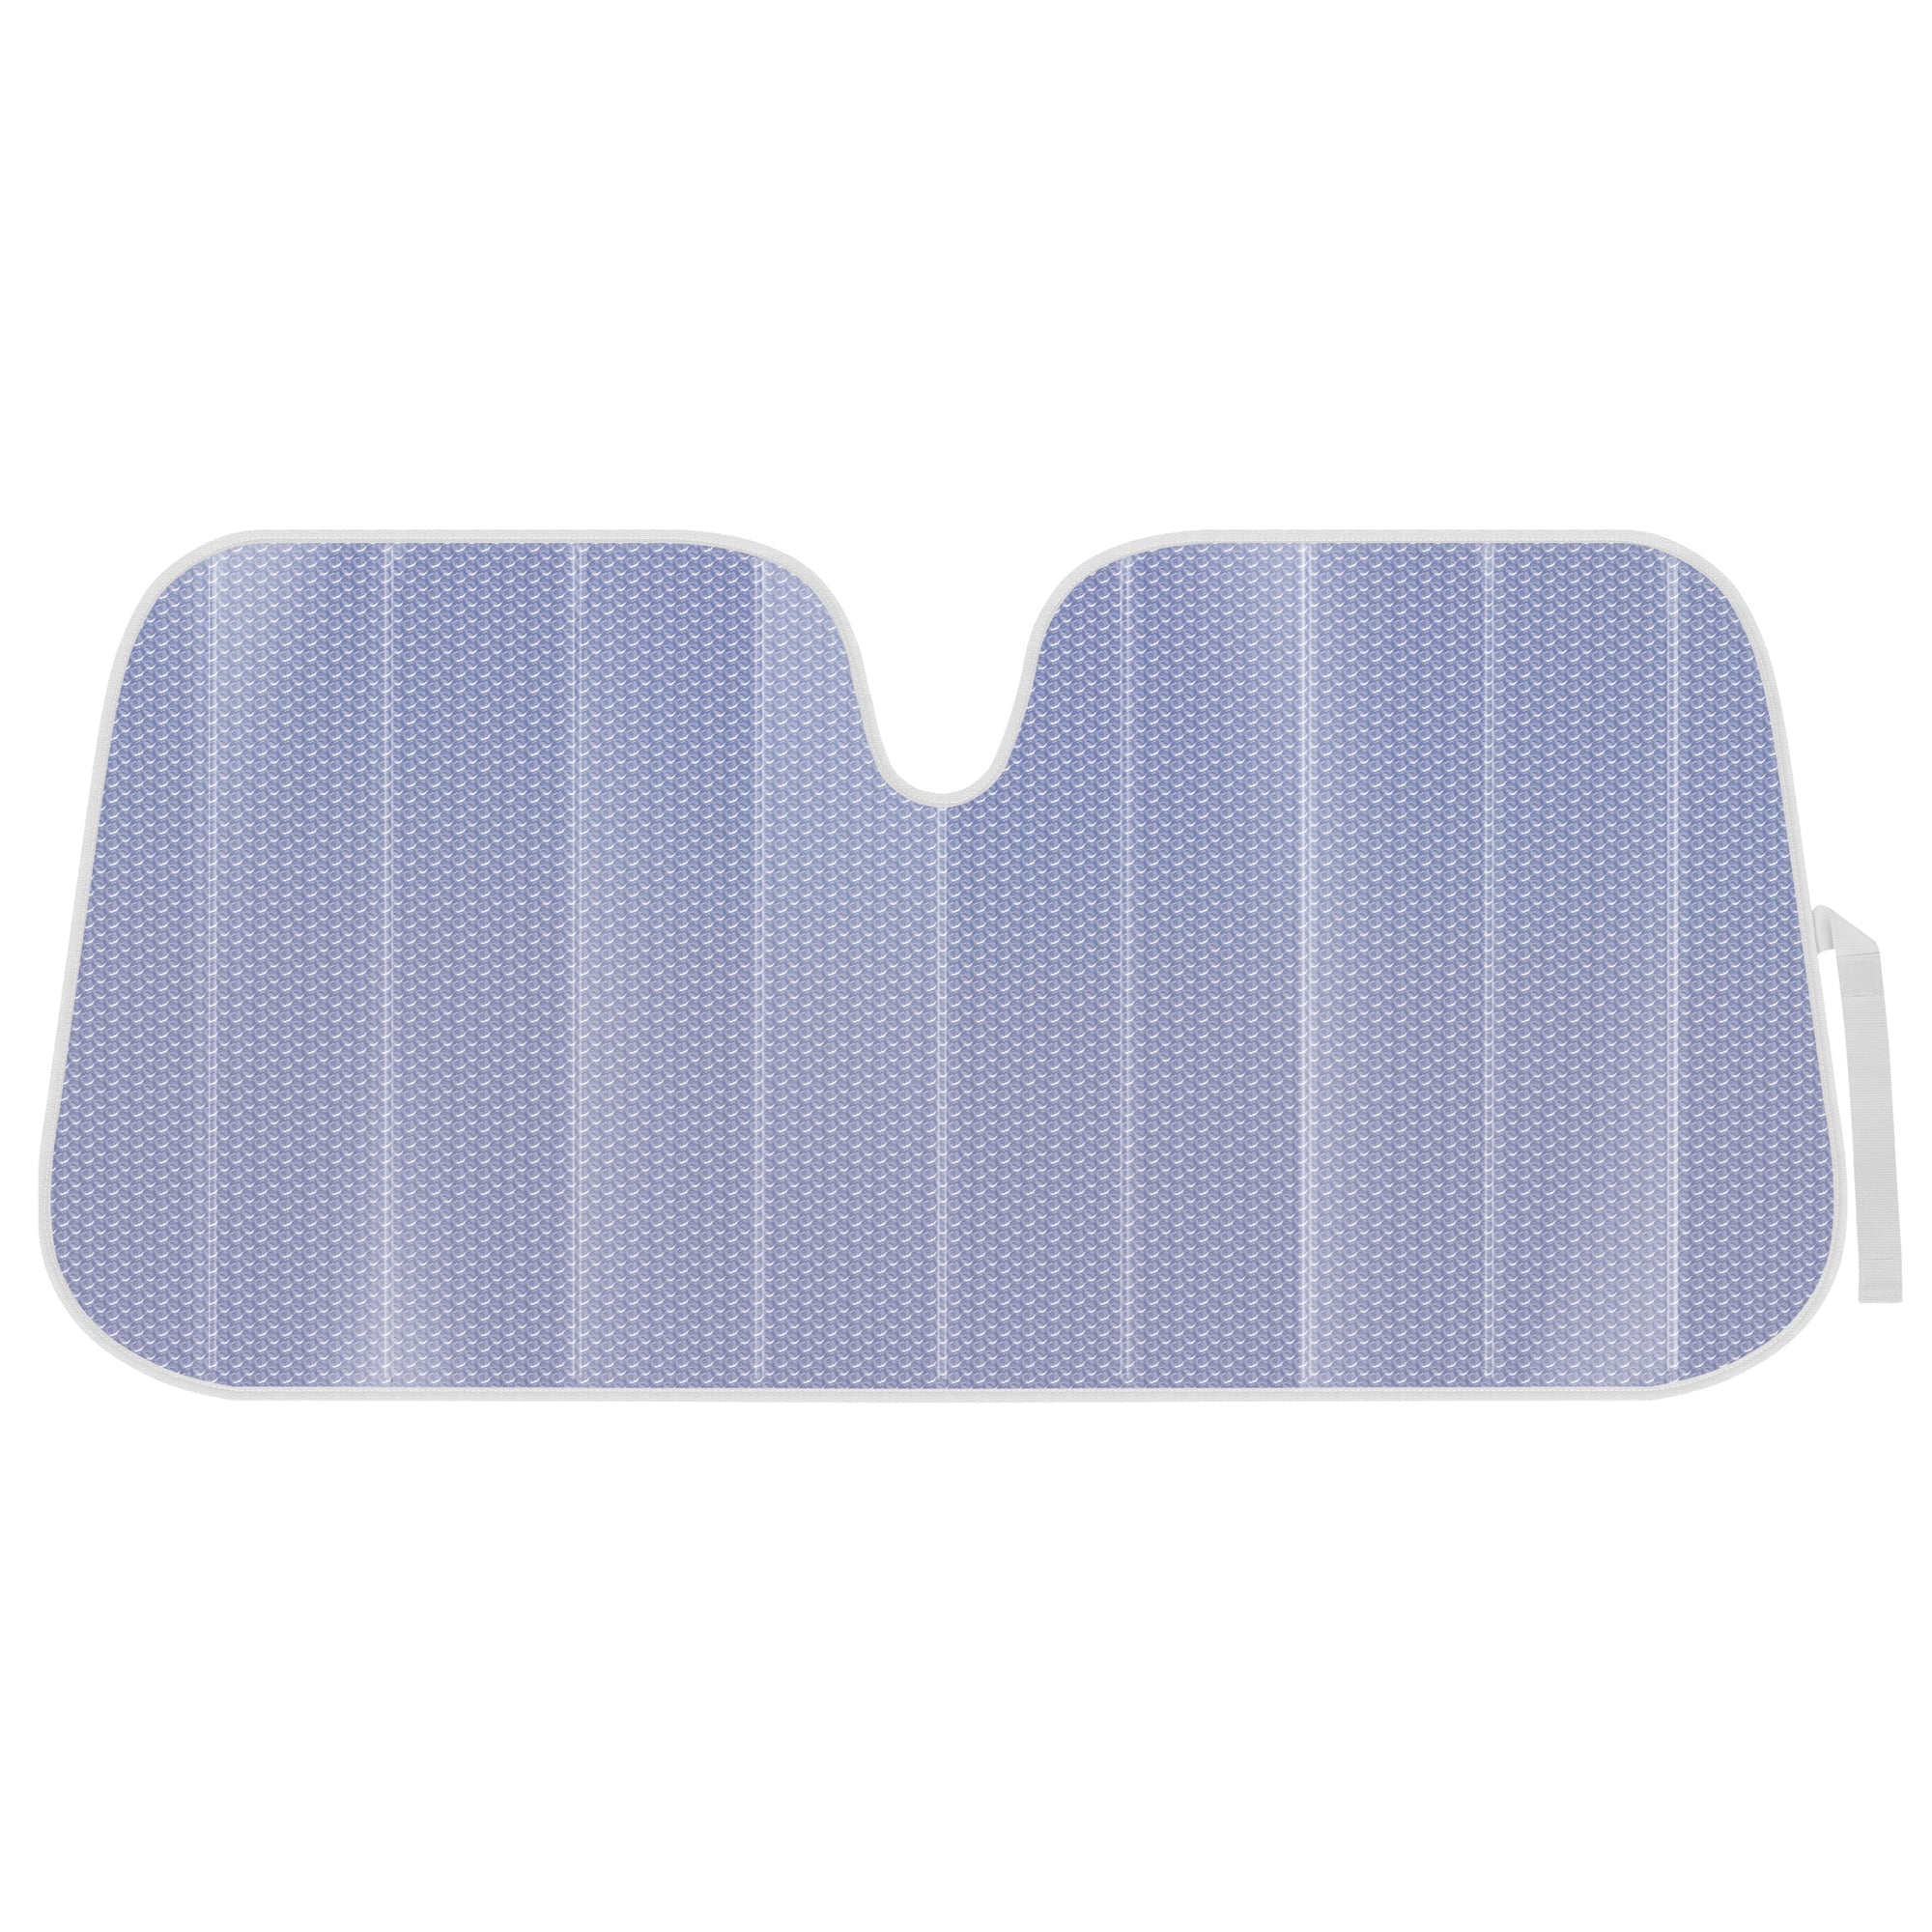 Lavender Shine, Front Windshield Sunshade-Accordion Folding Auto Shade for Car Truck SUV-Blocks UV Rays Sun Visor Protector-Keeps Your Vehicle Cool- 57 x 27 in